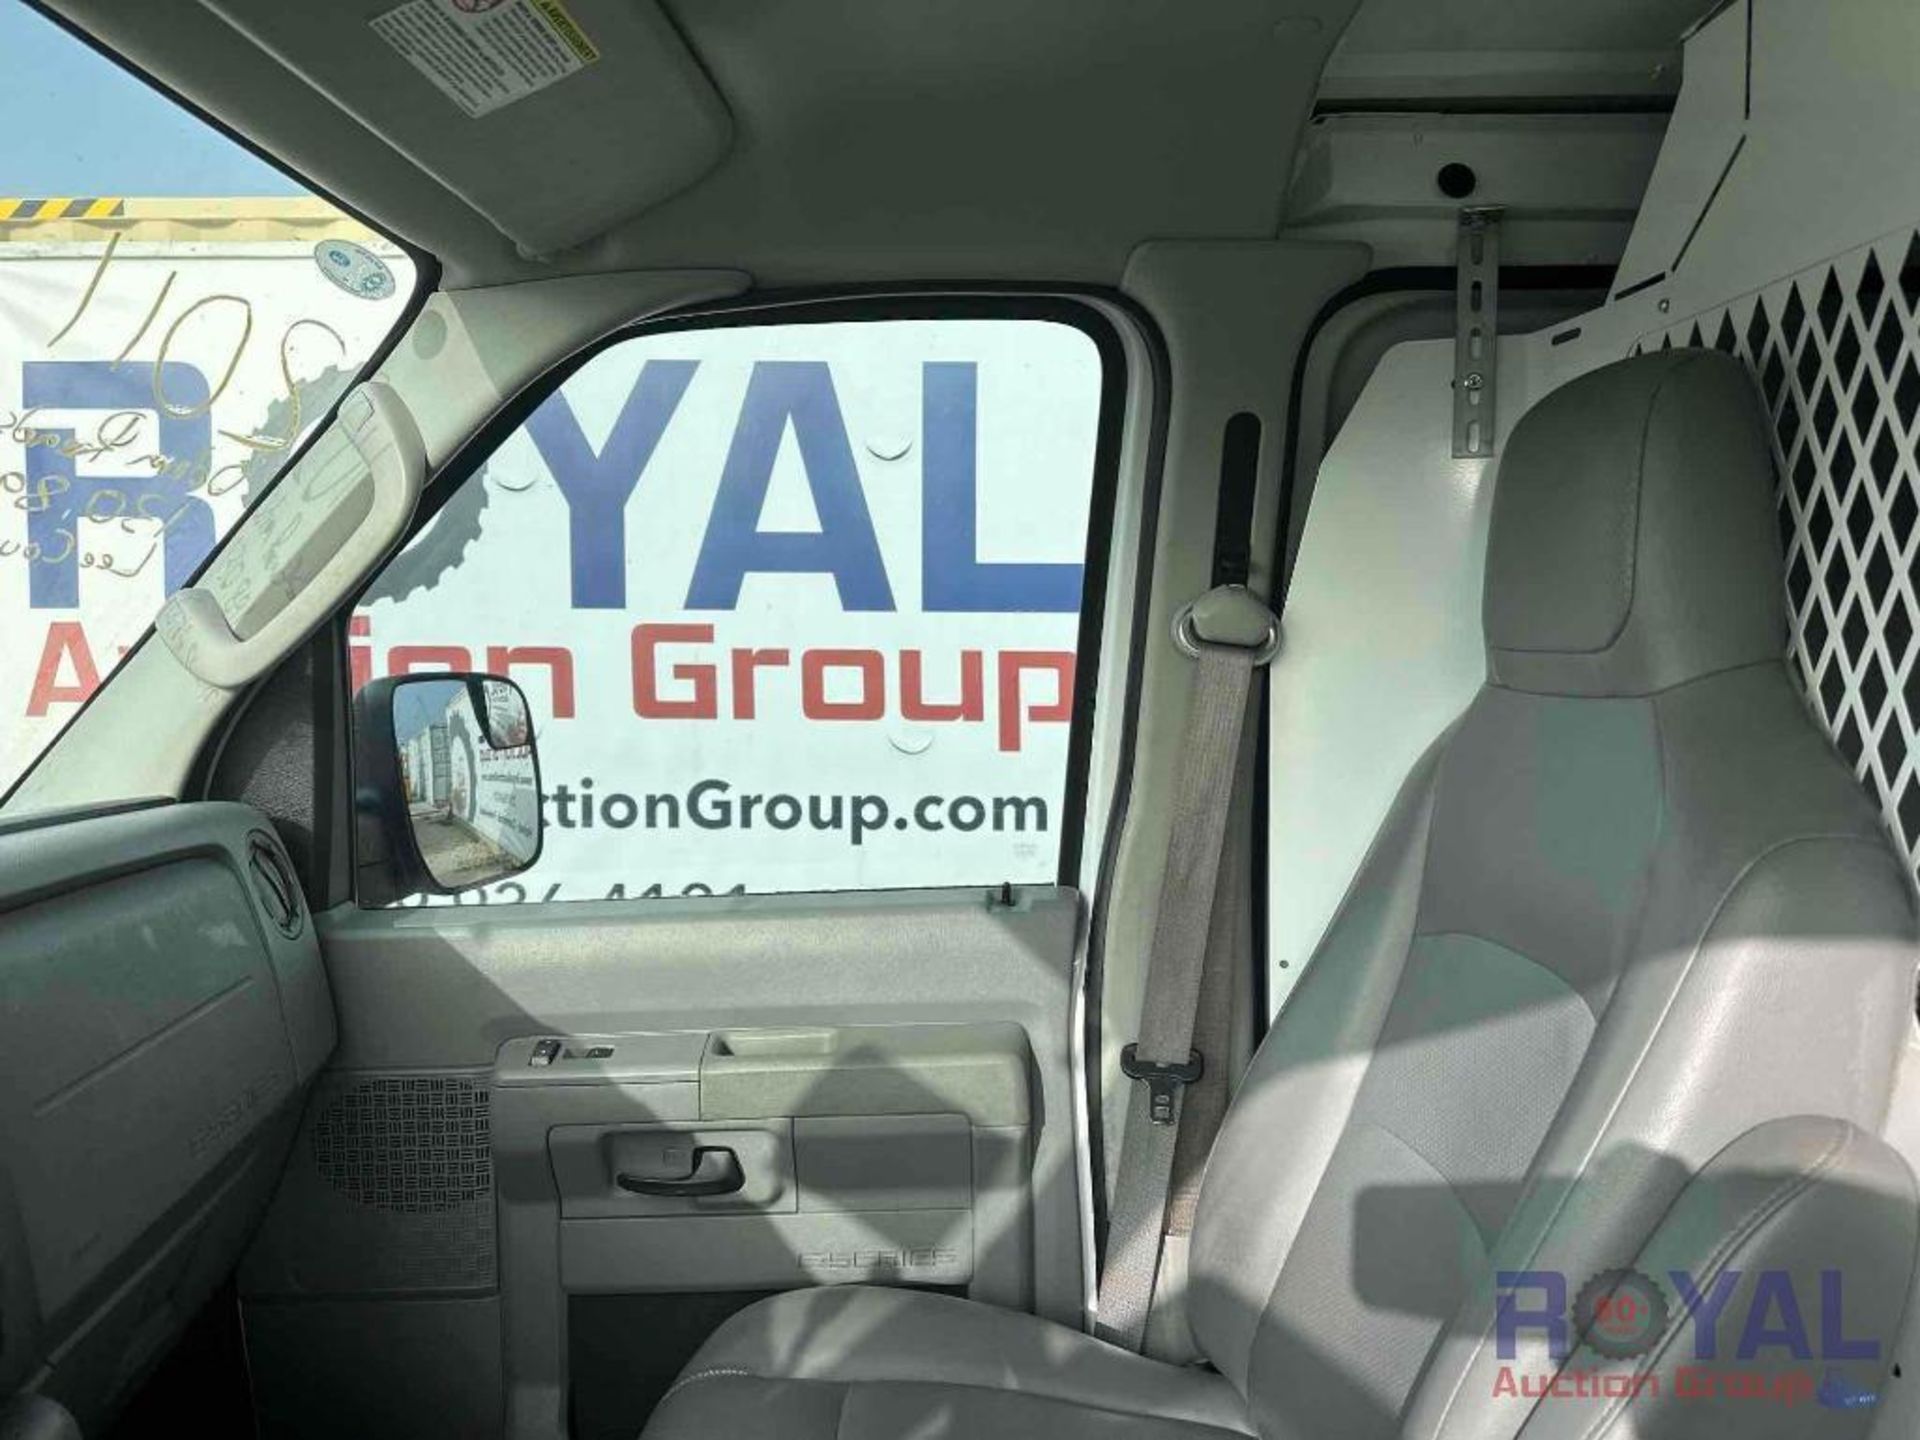 2011 Ford E350 Cargo Van - Image 18 of 27